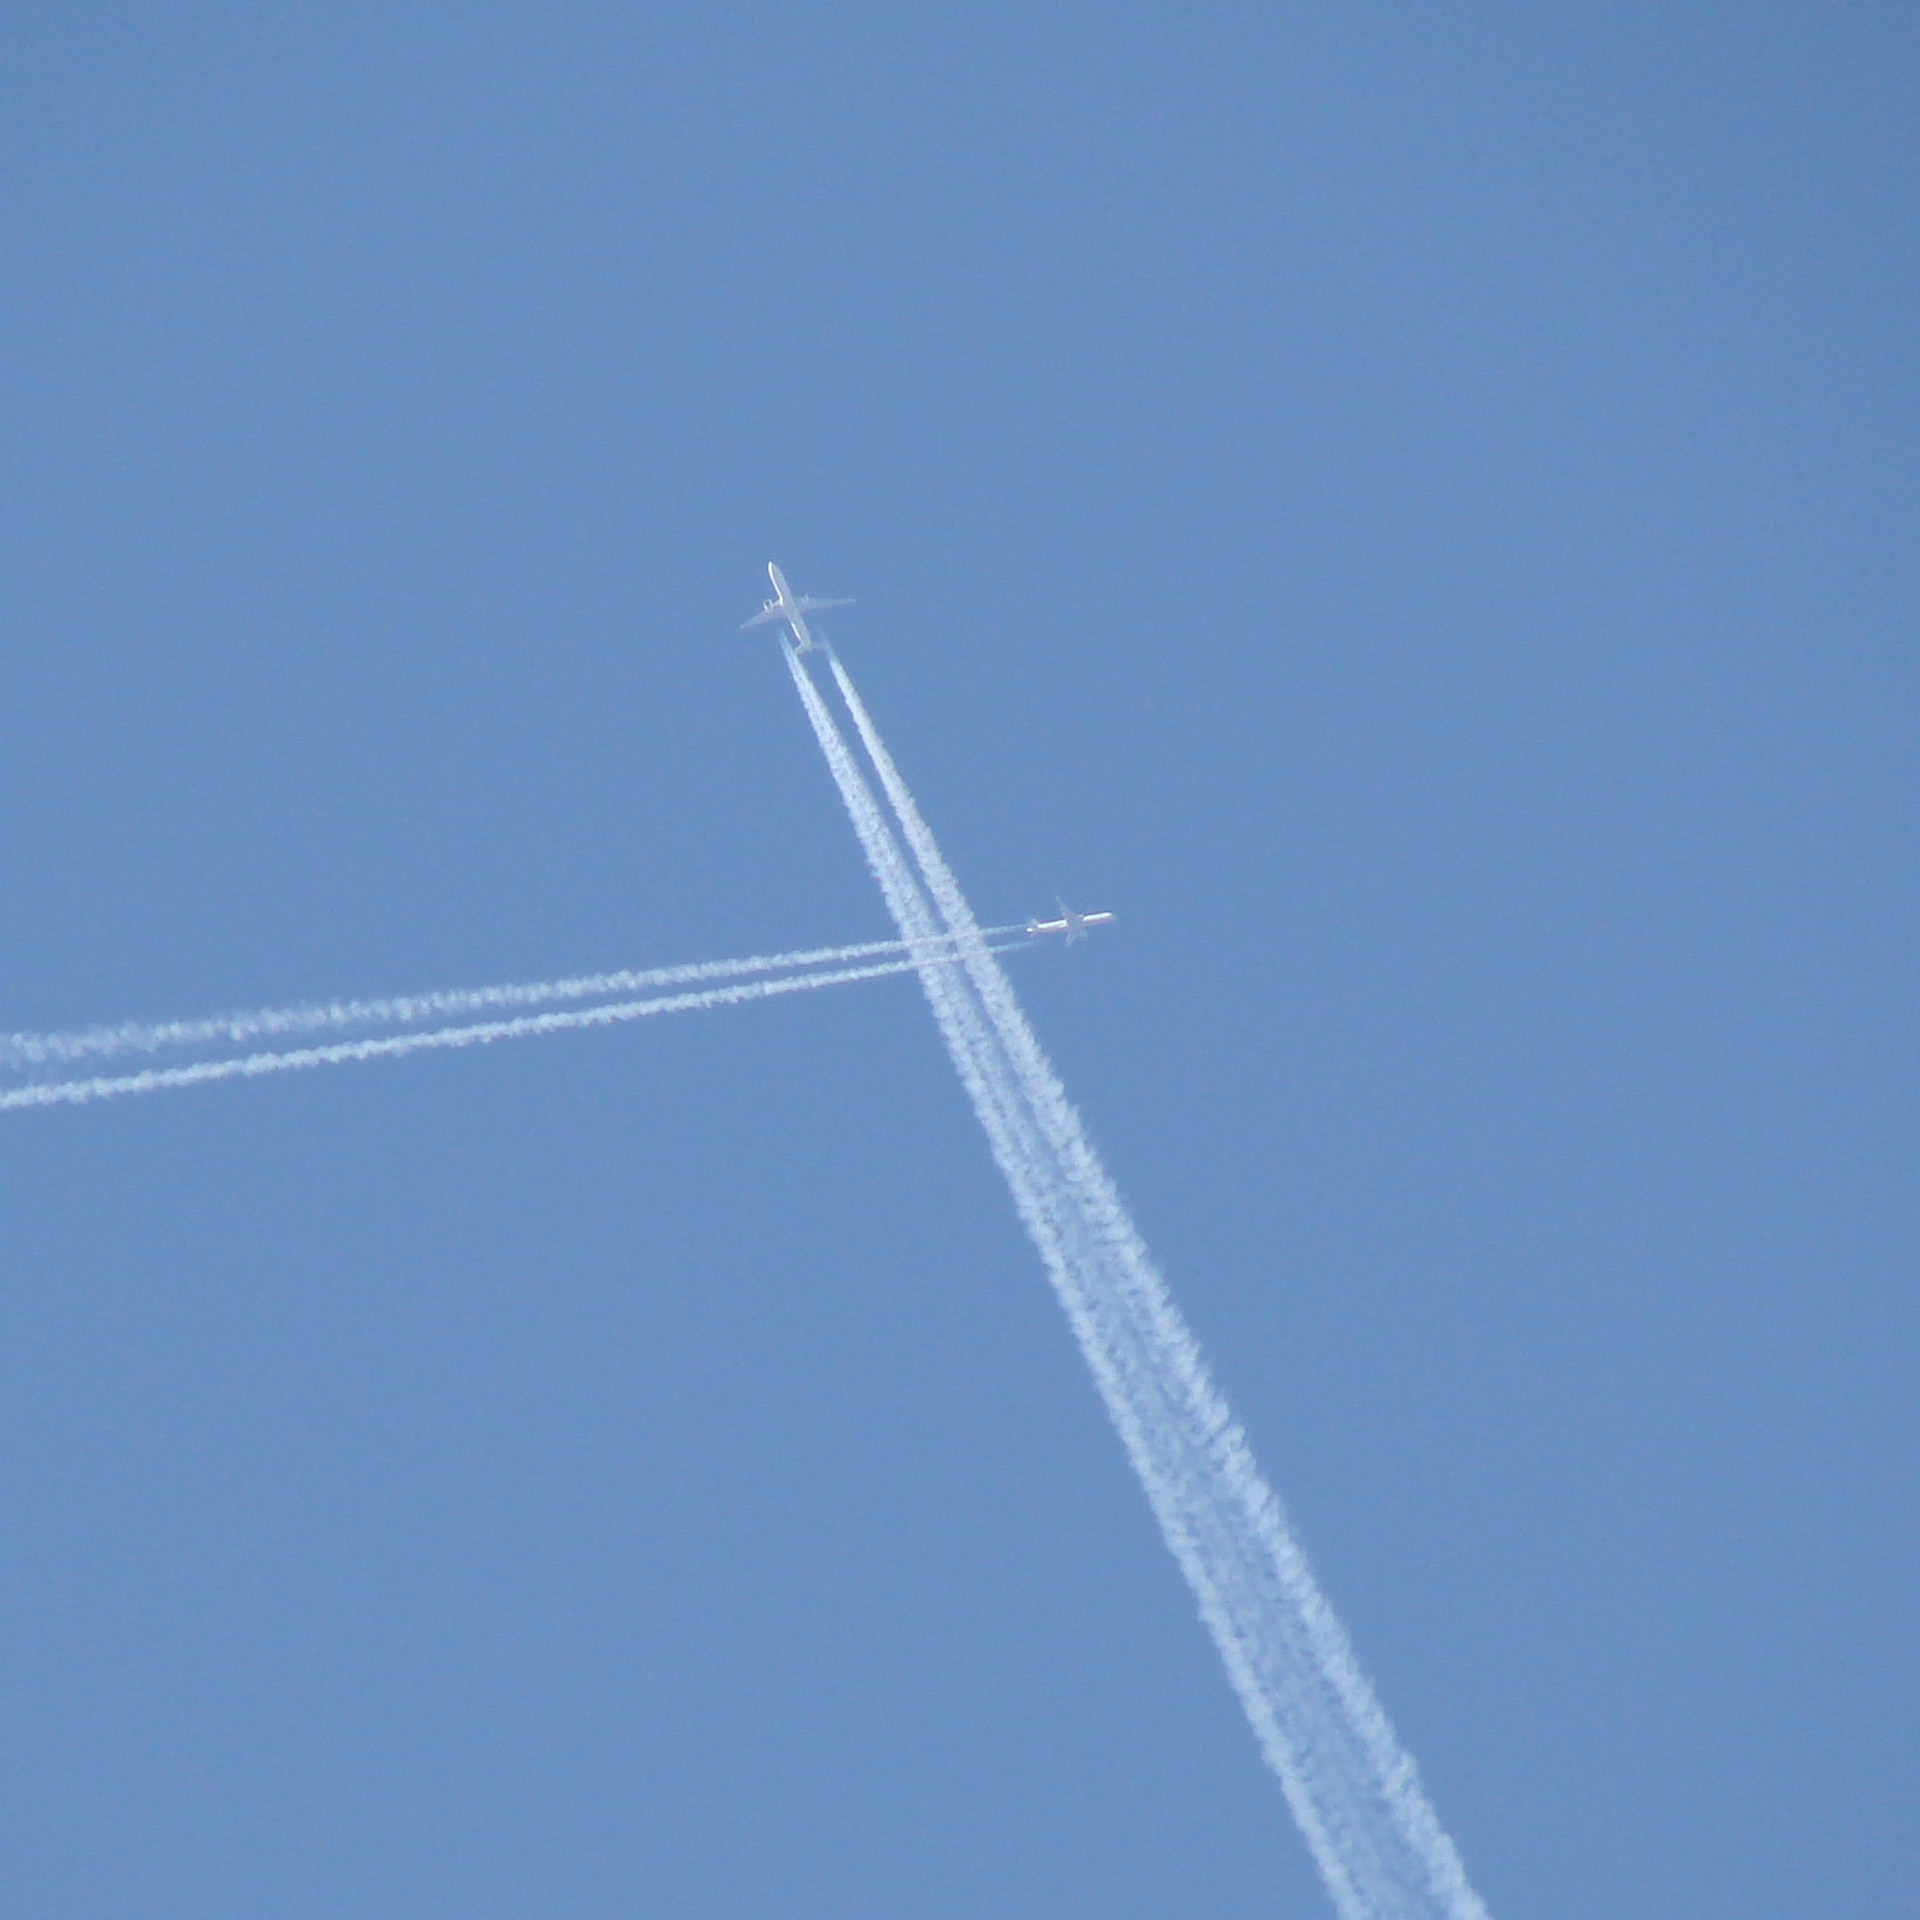 jets crossing paths sky free photo